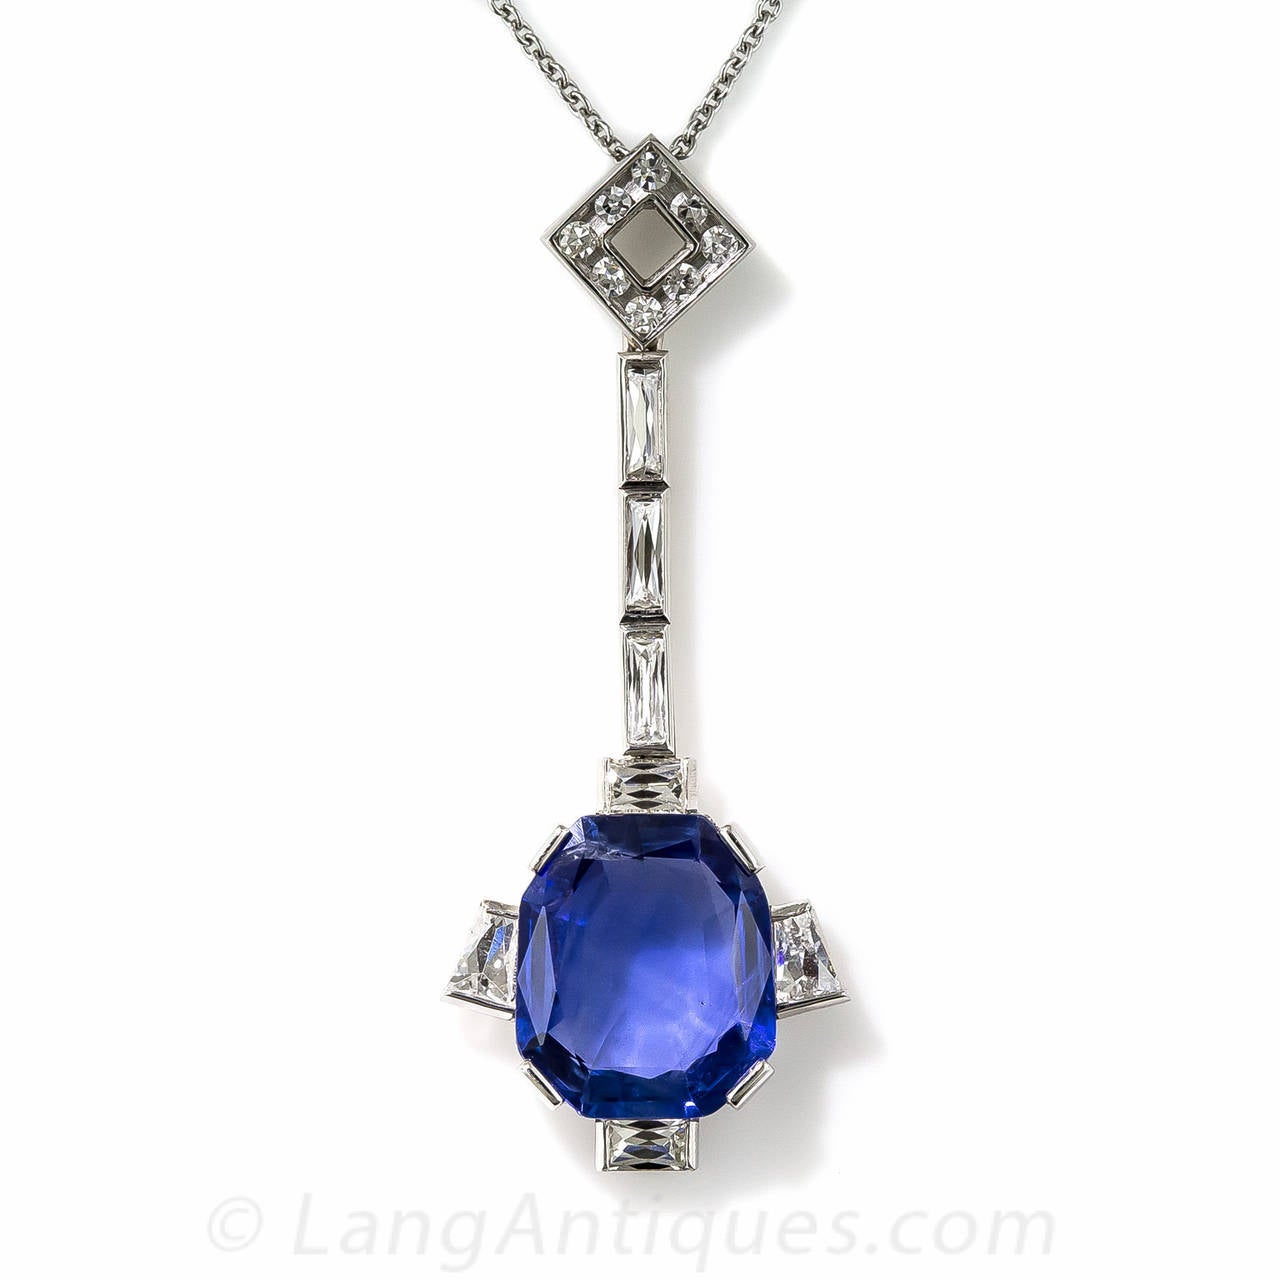 An enchanting royal blue, emerald-cut sapphire, weighing 5.50 carats, unusually fashioned with slightly flared sides, is majestically presented in this sleek and sexy Art Deco inspired platinum and diamond lavaliere necklace. The natural colored,